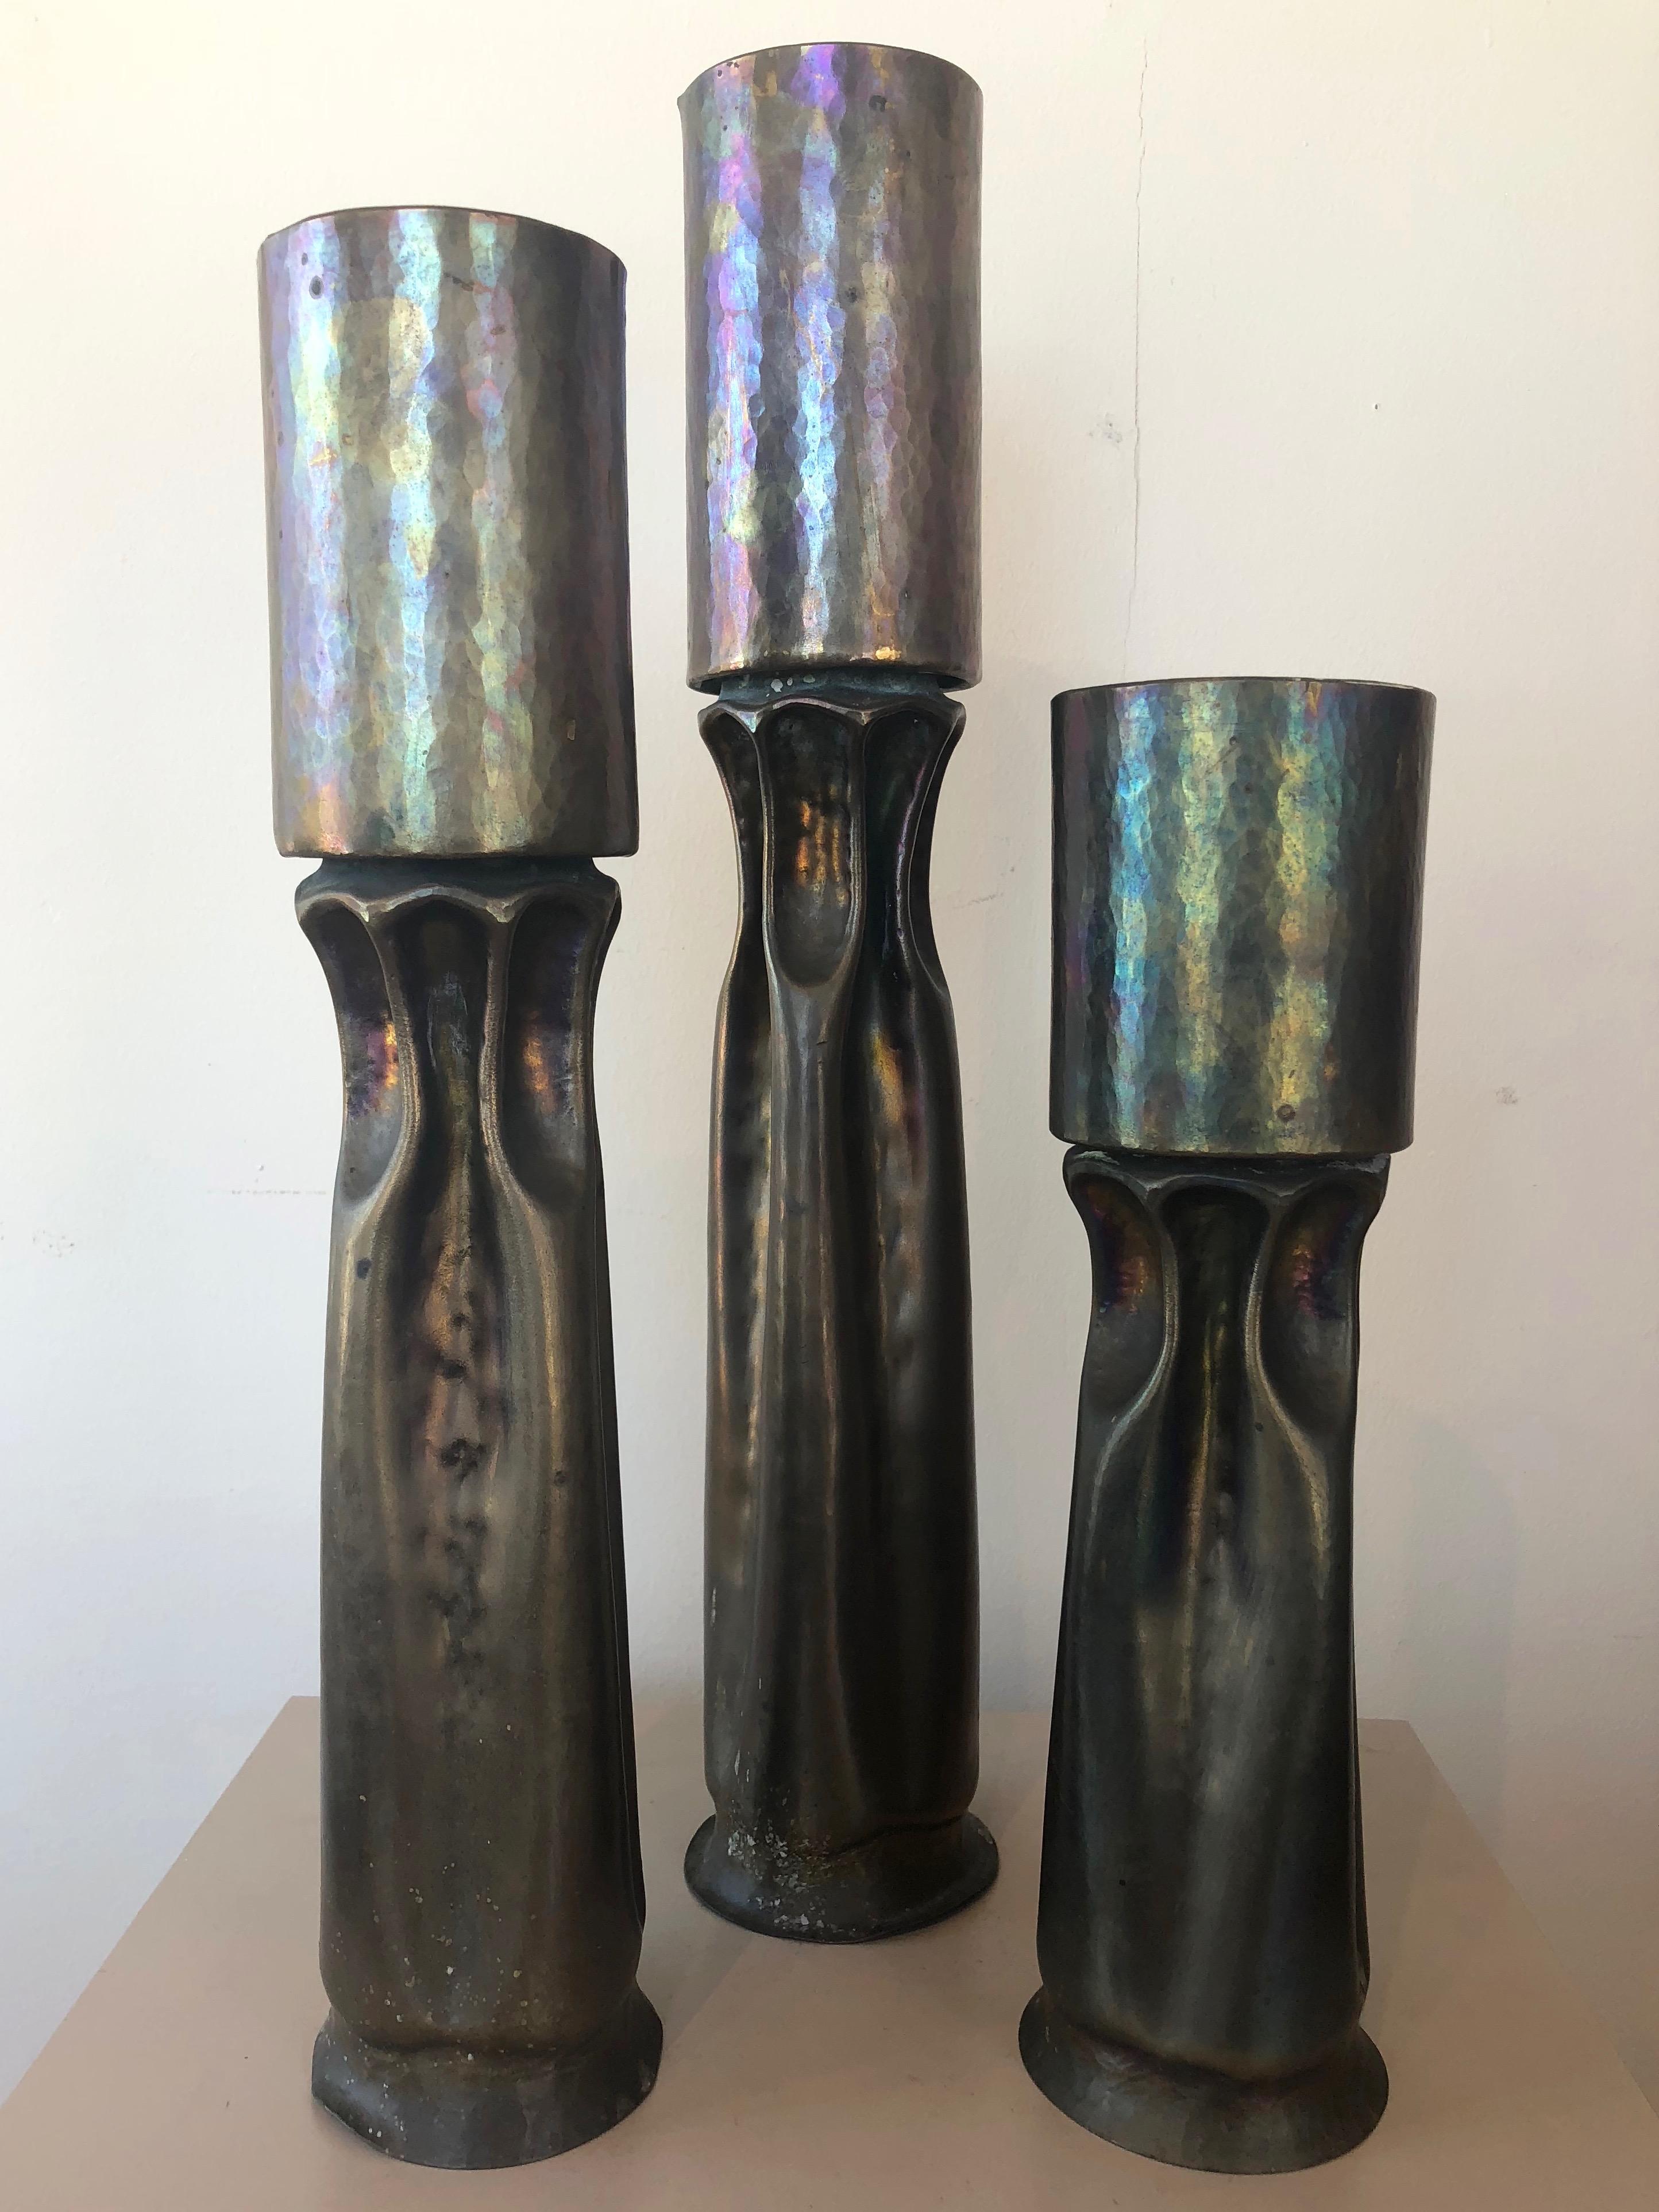 A trio of large 1970s Brutalist brass candleholders by master metalsmith and sculptor Thomas Roy Markusen.

Tall, tortured form of hammered and shaped brass has an organic yet alien aesthetic. Artistically applied heat oxidized patina transforms